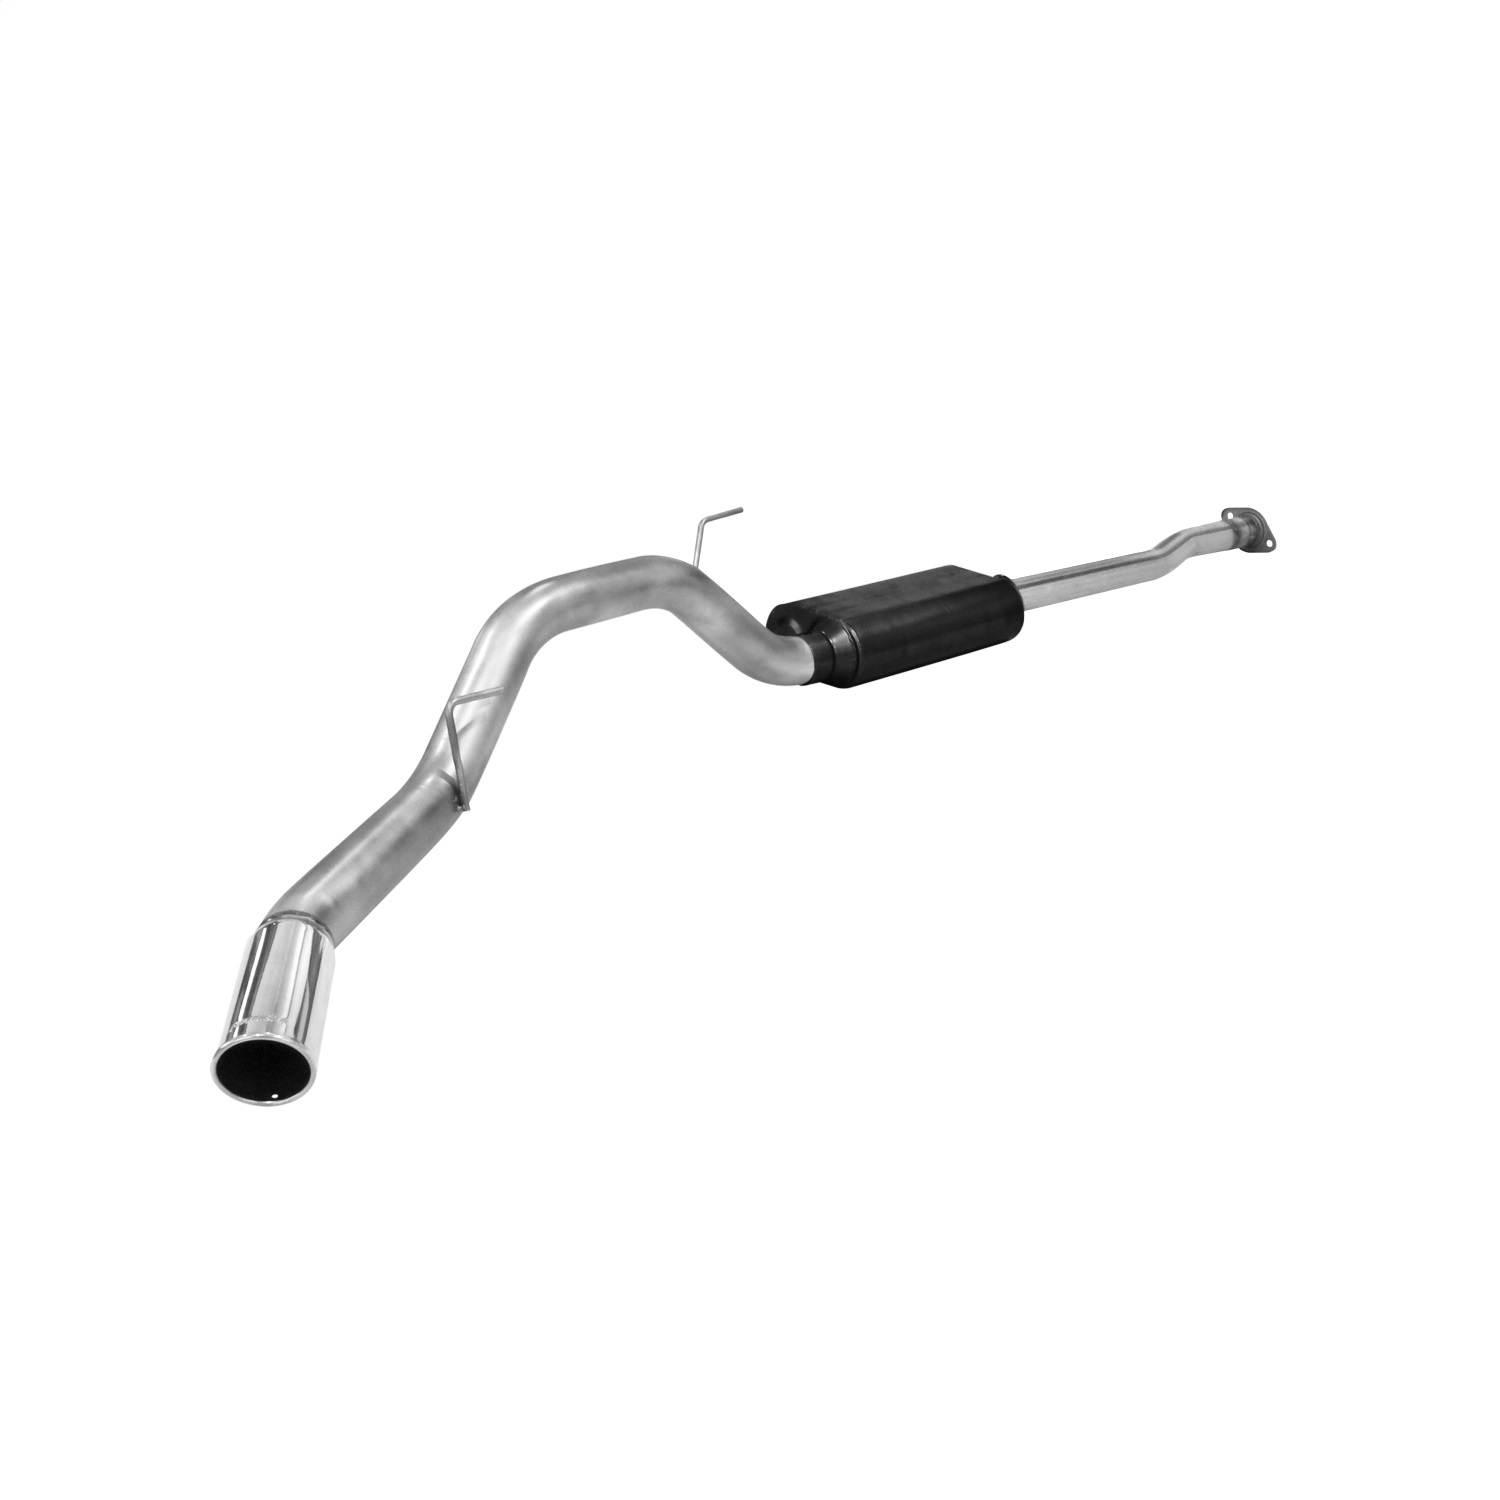 Flowmaster Flowmaster 817567 American Thunder Cat Back Exhaust System Fits 09-14 F-150